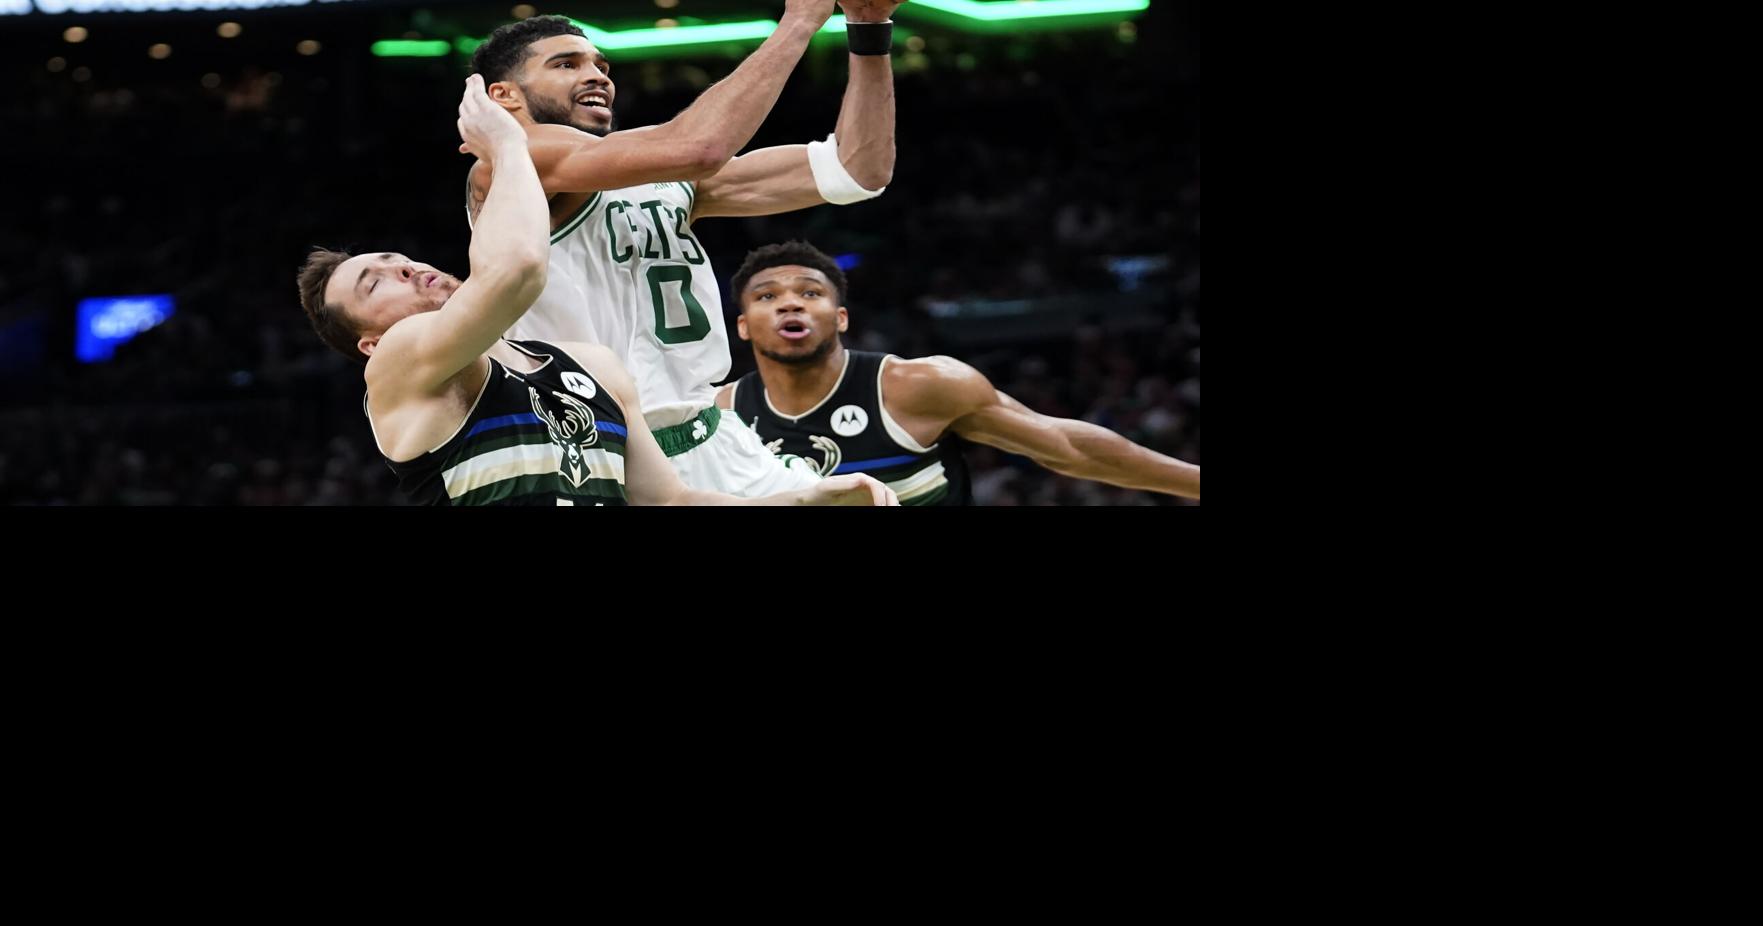 Celtics weather Warriors' storm, win Game 3 to take 2-1 NBA Finals